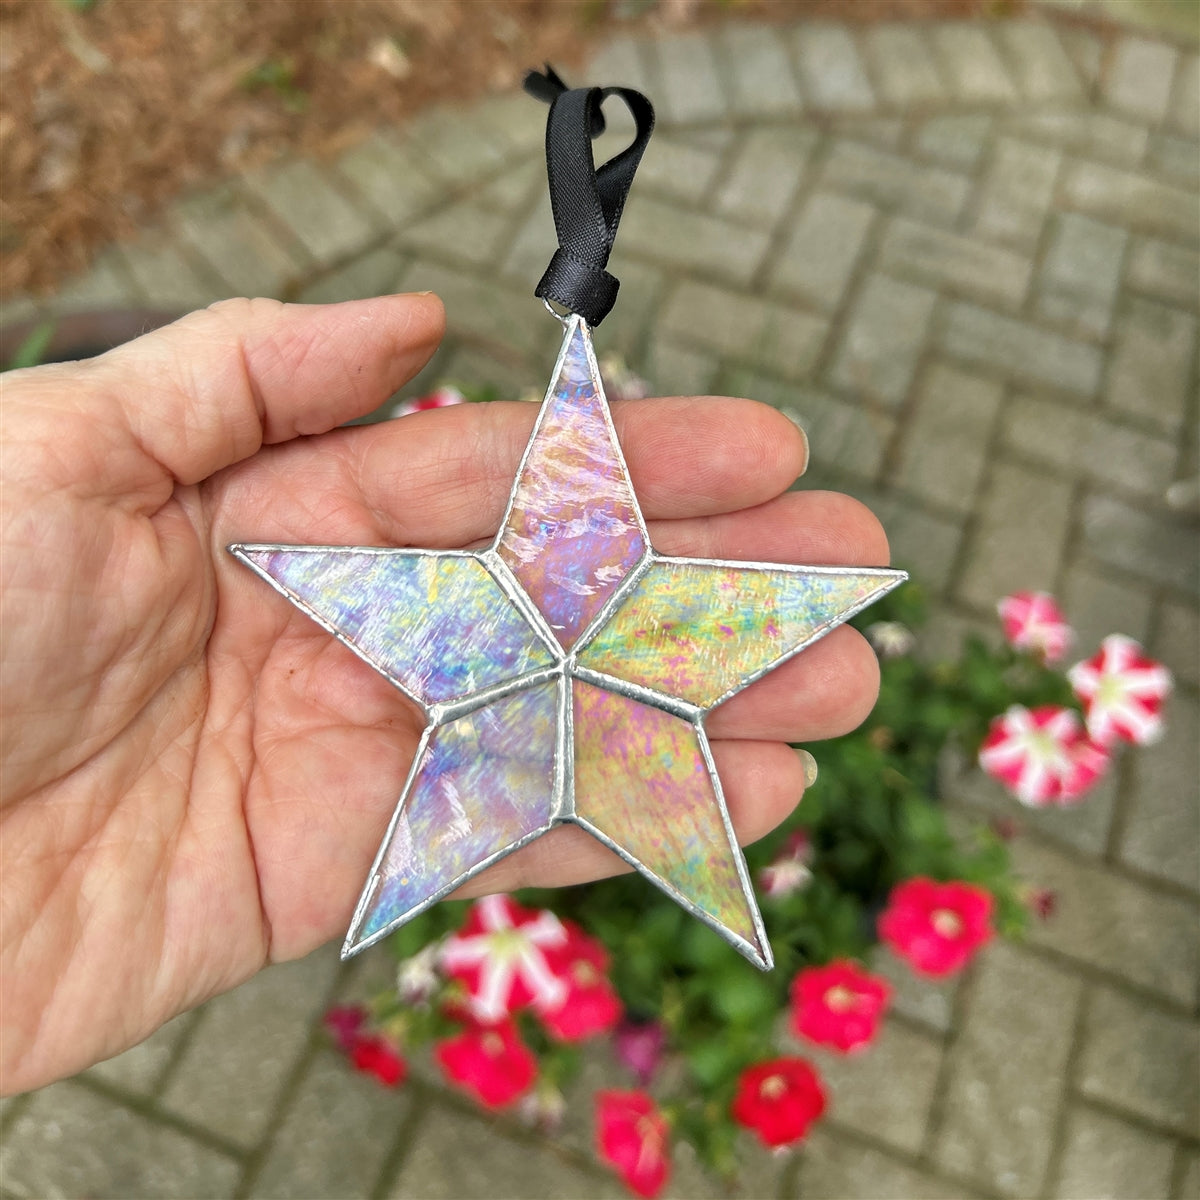 Clear iridescent star being held in hand.